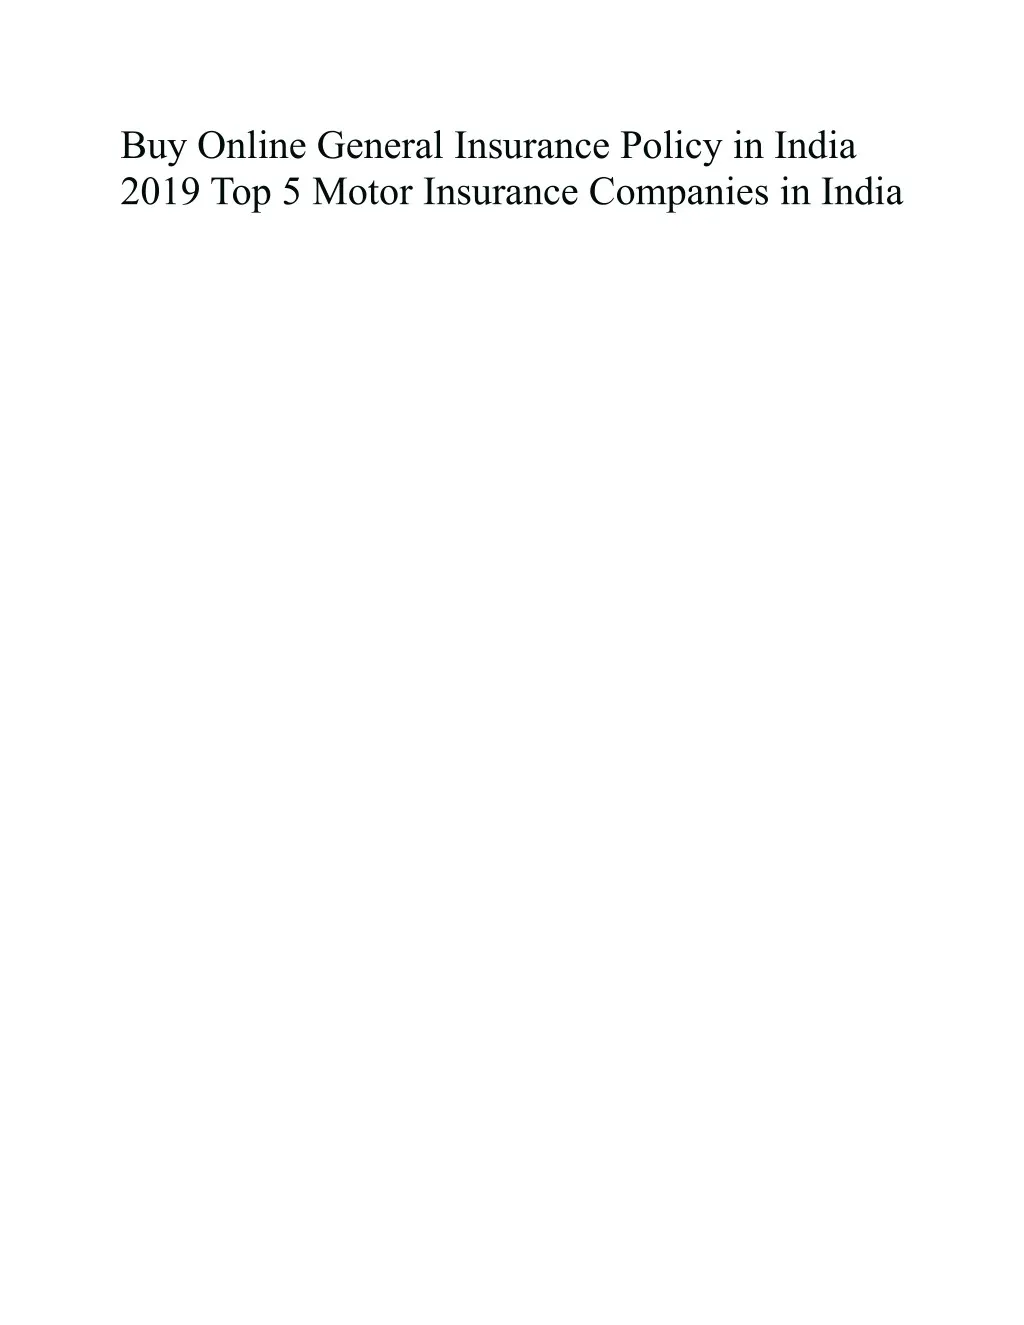 buy online general insurance policy in india 2019